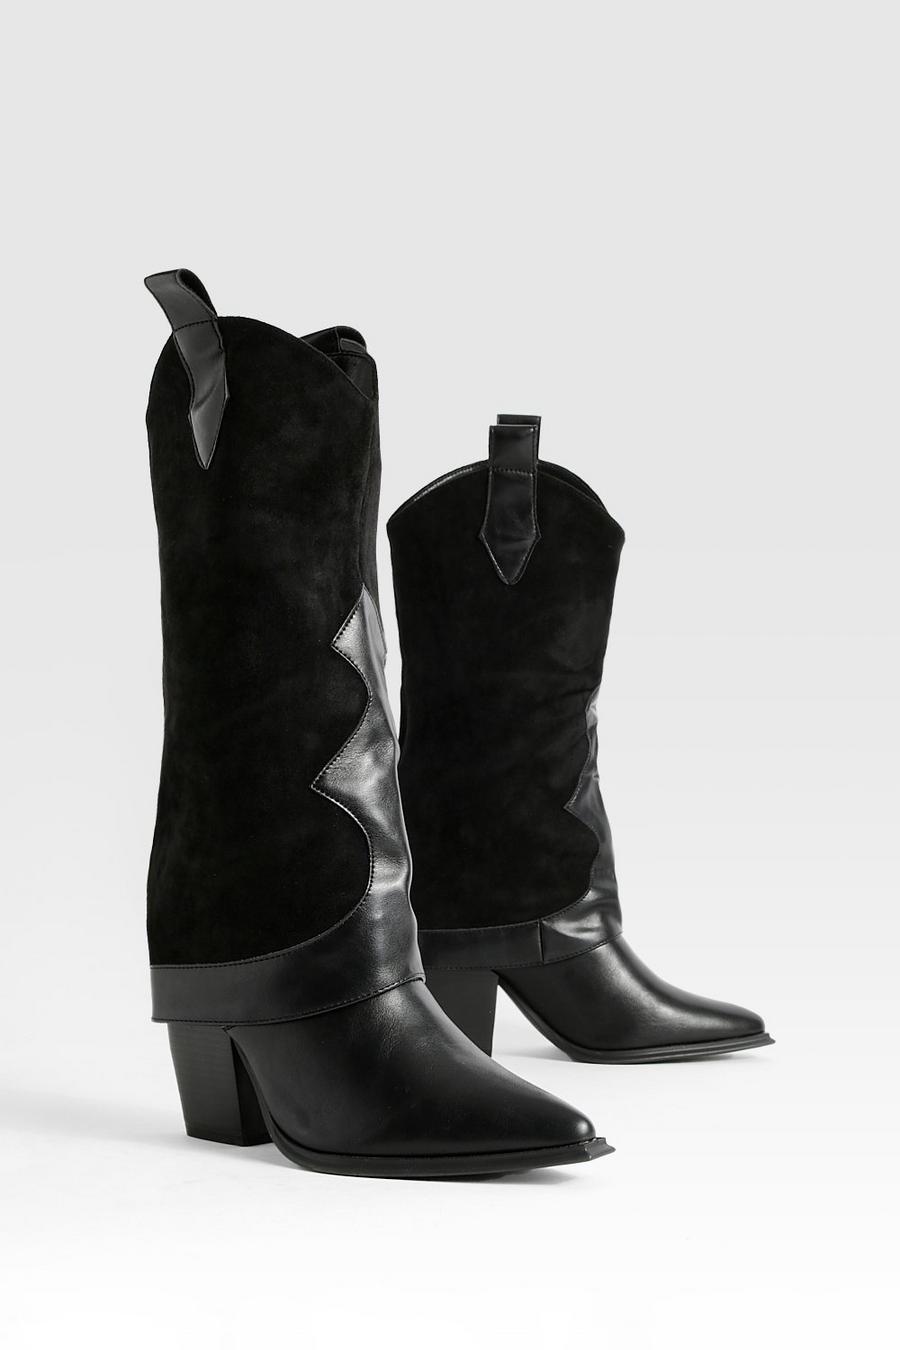 Black Knee High Fold Over Western Cowboy Boots 